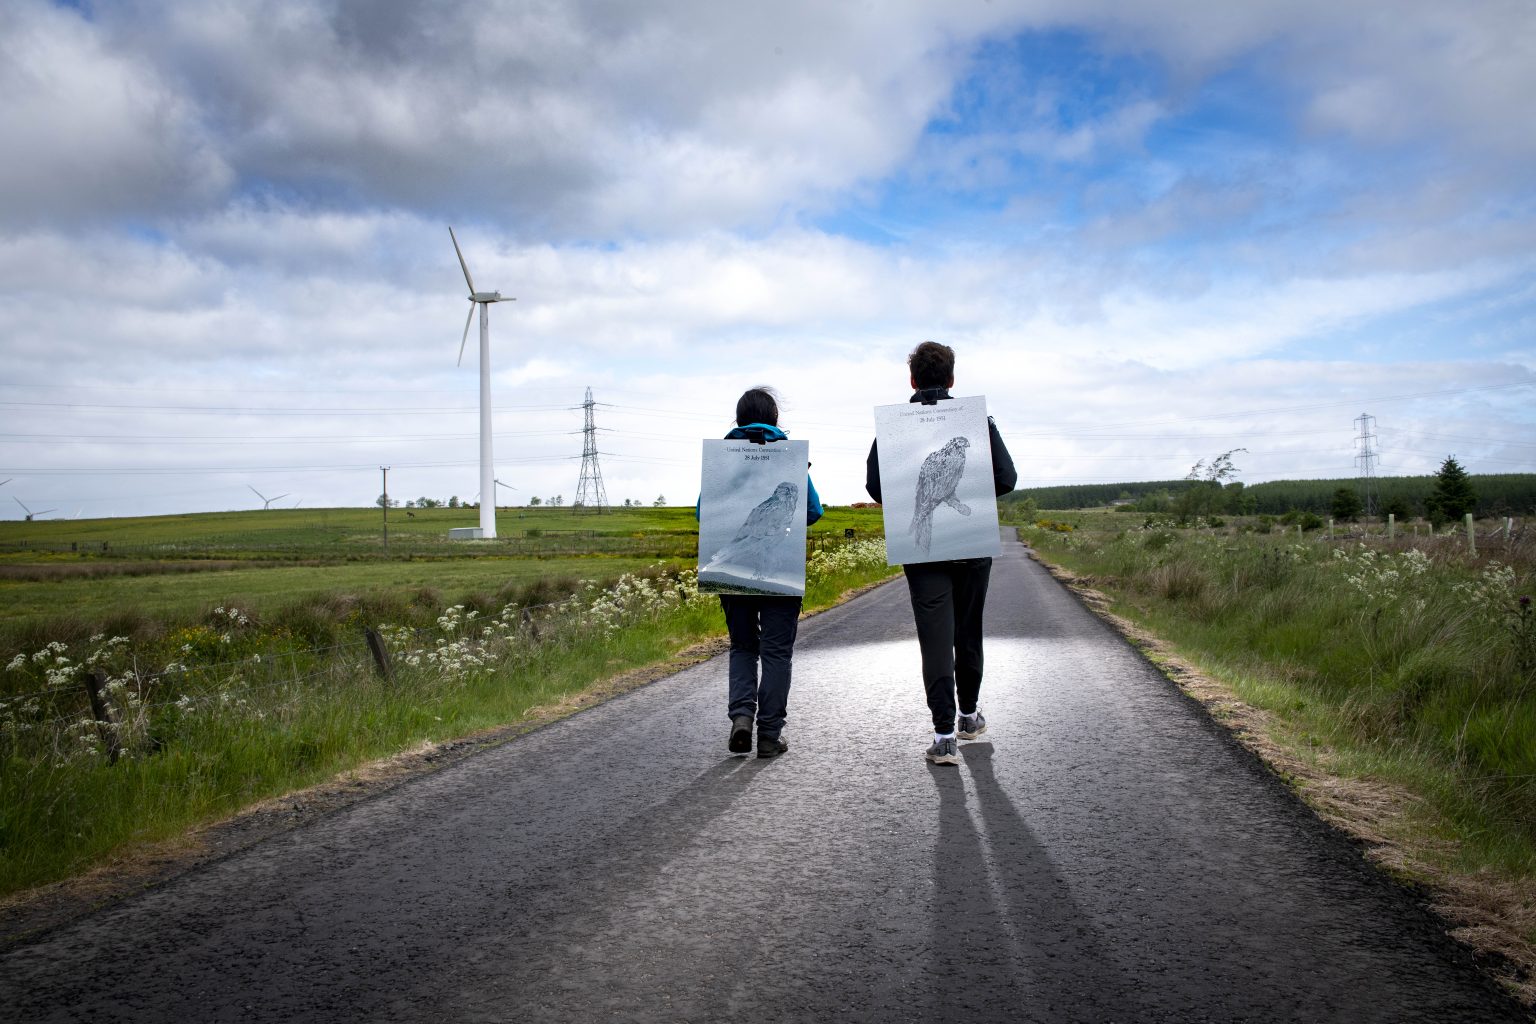 Two people walk down an empty country road wearing mirrors on their back. Each mirror has text and a carving of a bird. The road is surrounded by fields of grass. There are windmills and phone towers in the background.